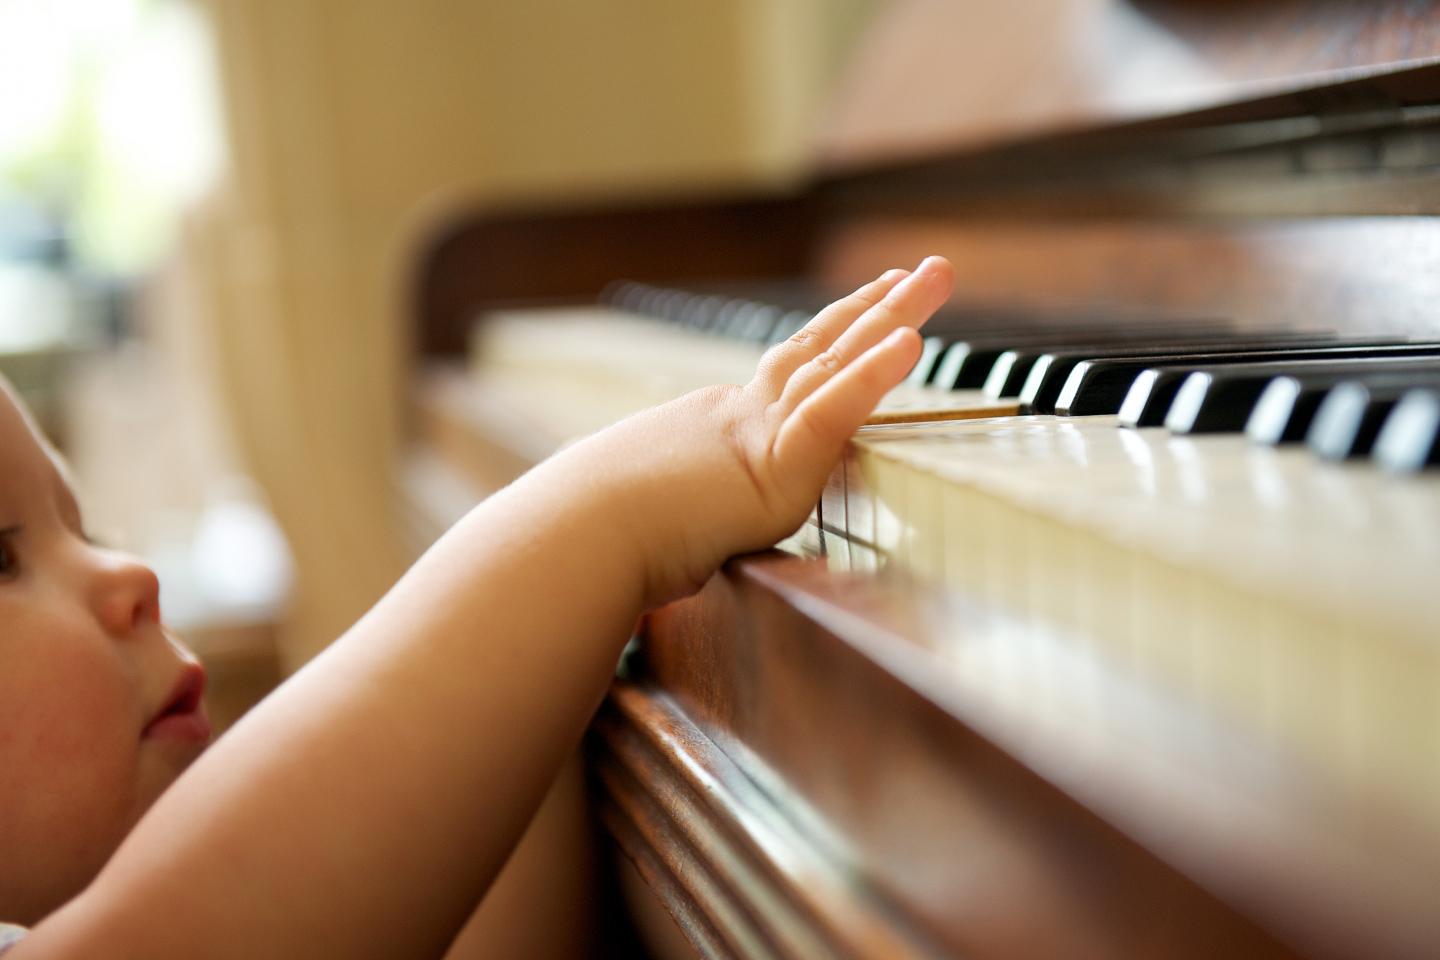 The Power of Music: Incorporating Music into Your Child’s Daily Routine